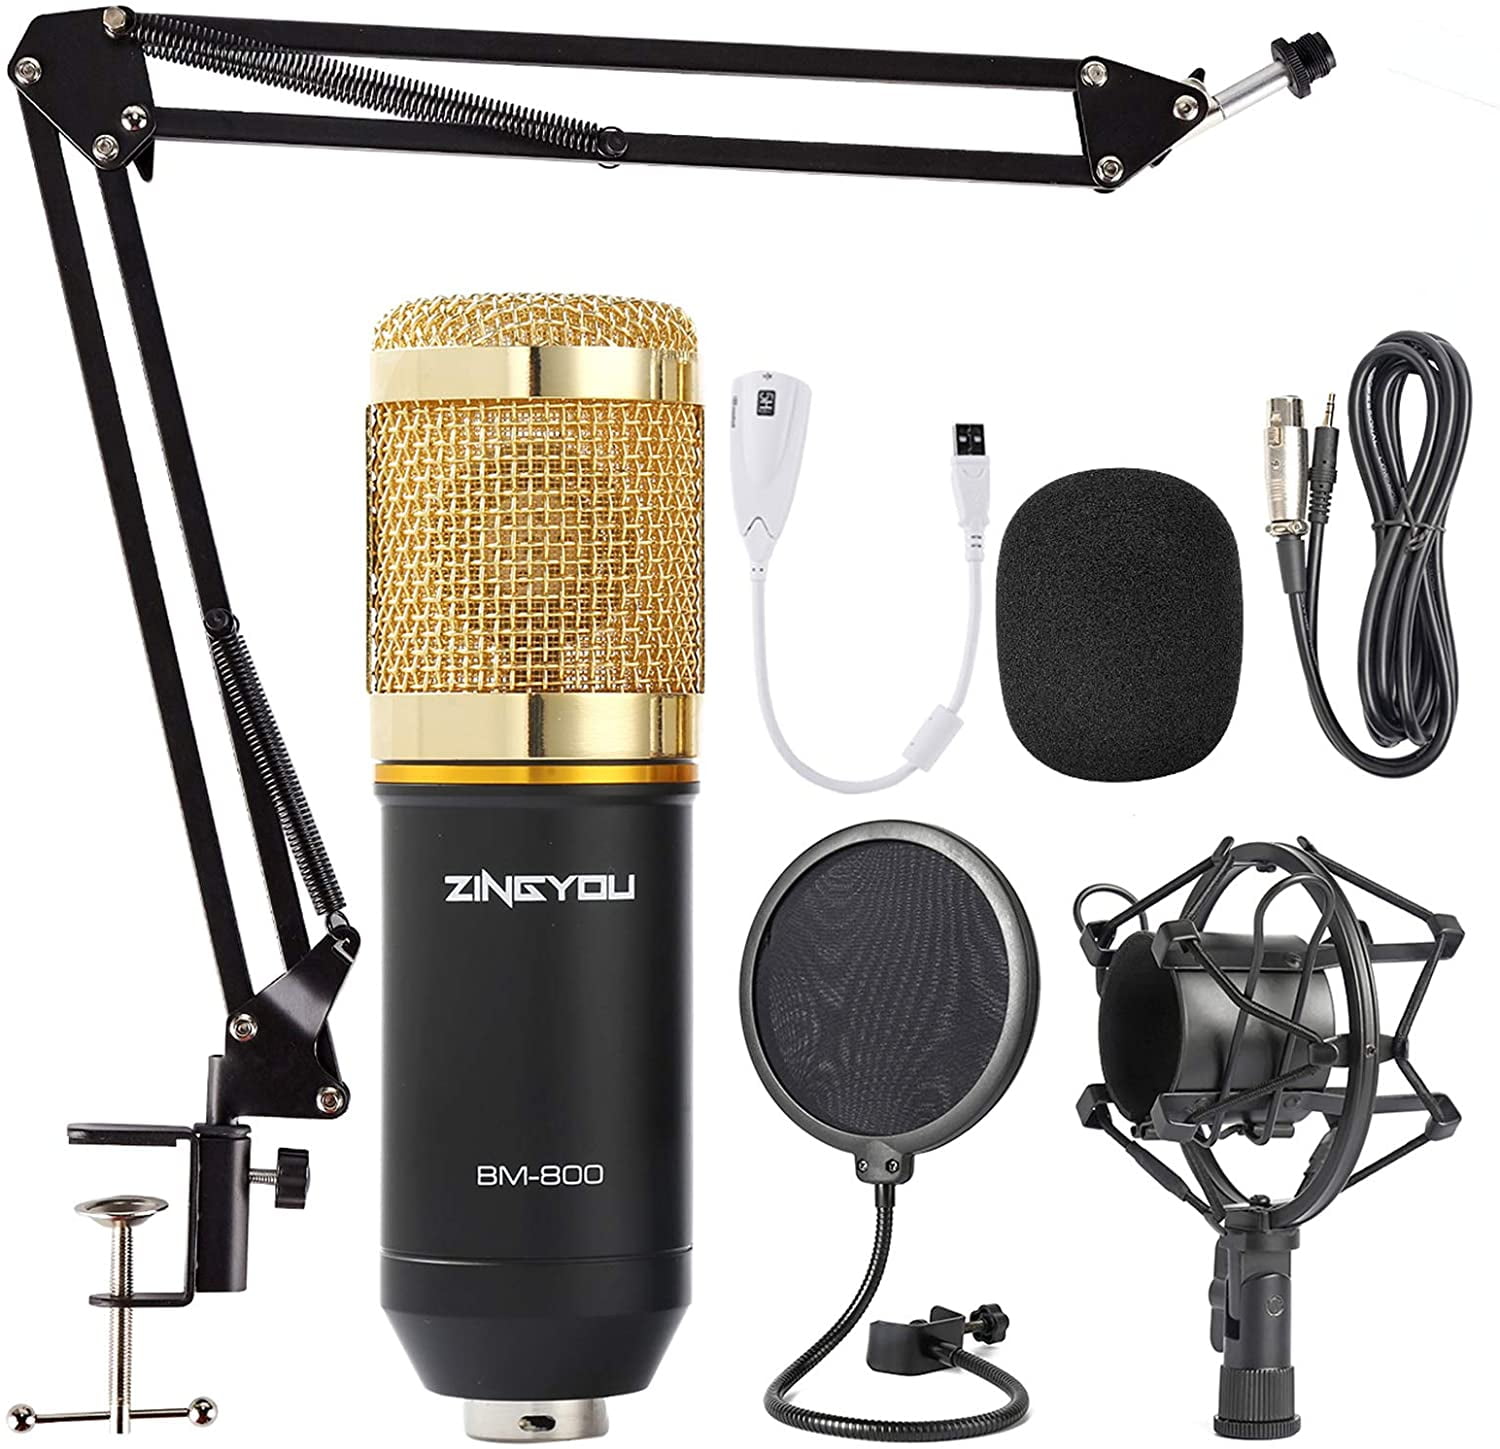 Legacy LSM-65 Studio Condenser Microphone with Shock Mount and case